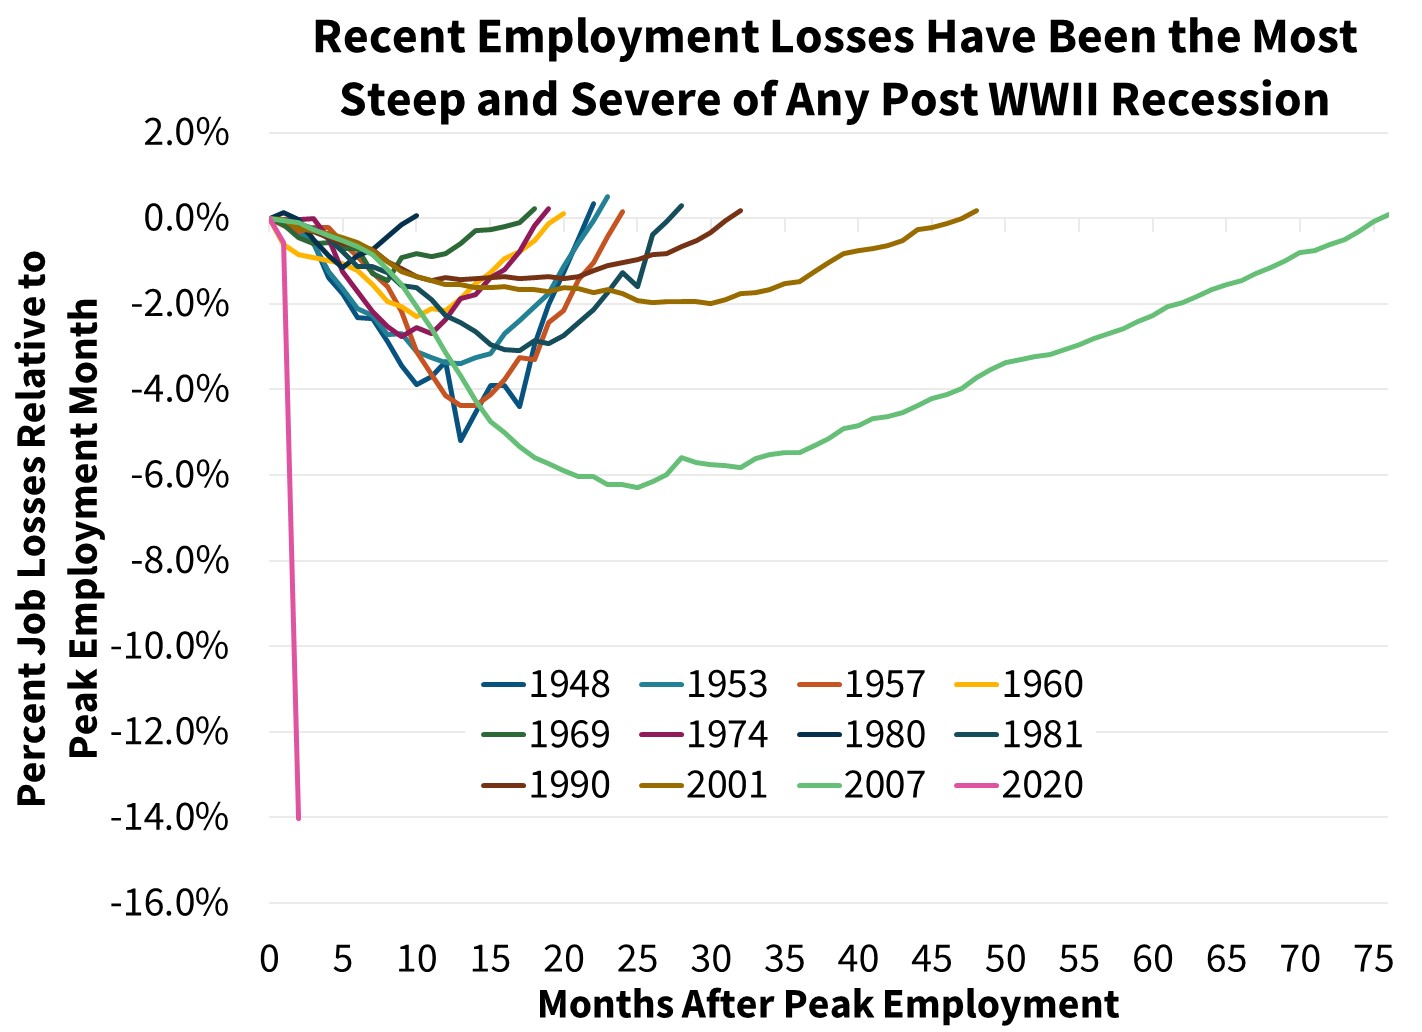  Recent Employment Losses Have Been the Most Steep and Severe of Any Post WWII Recession 